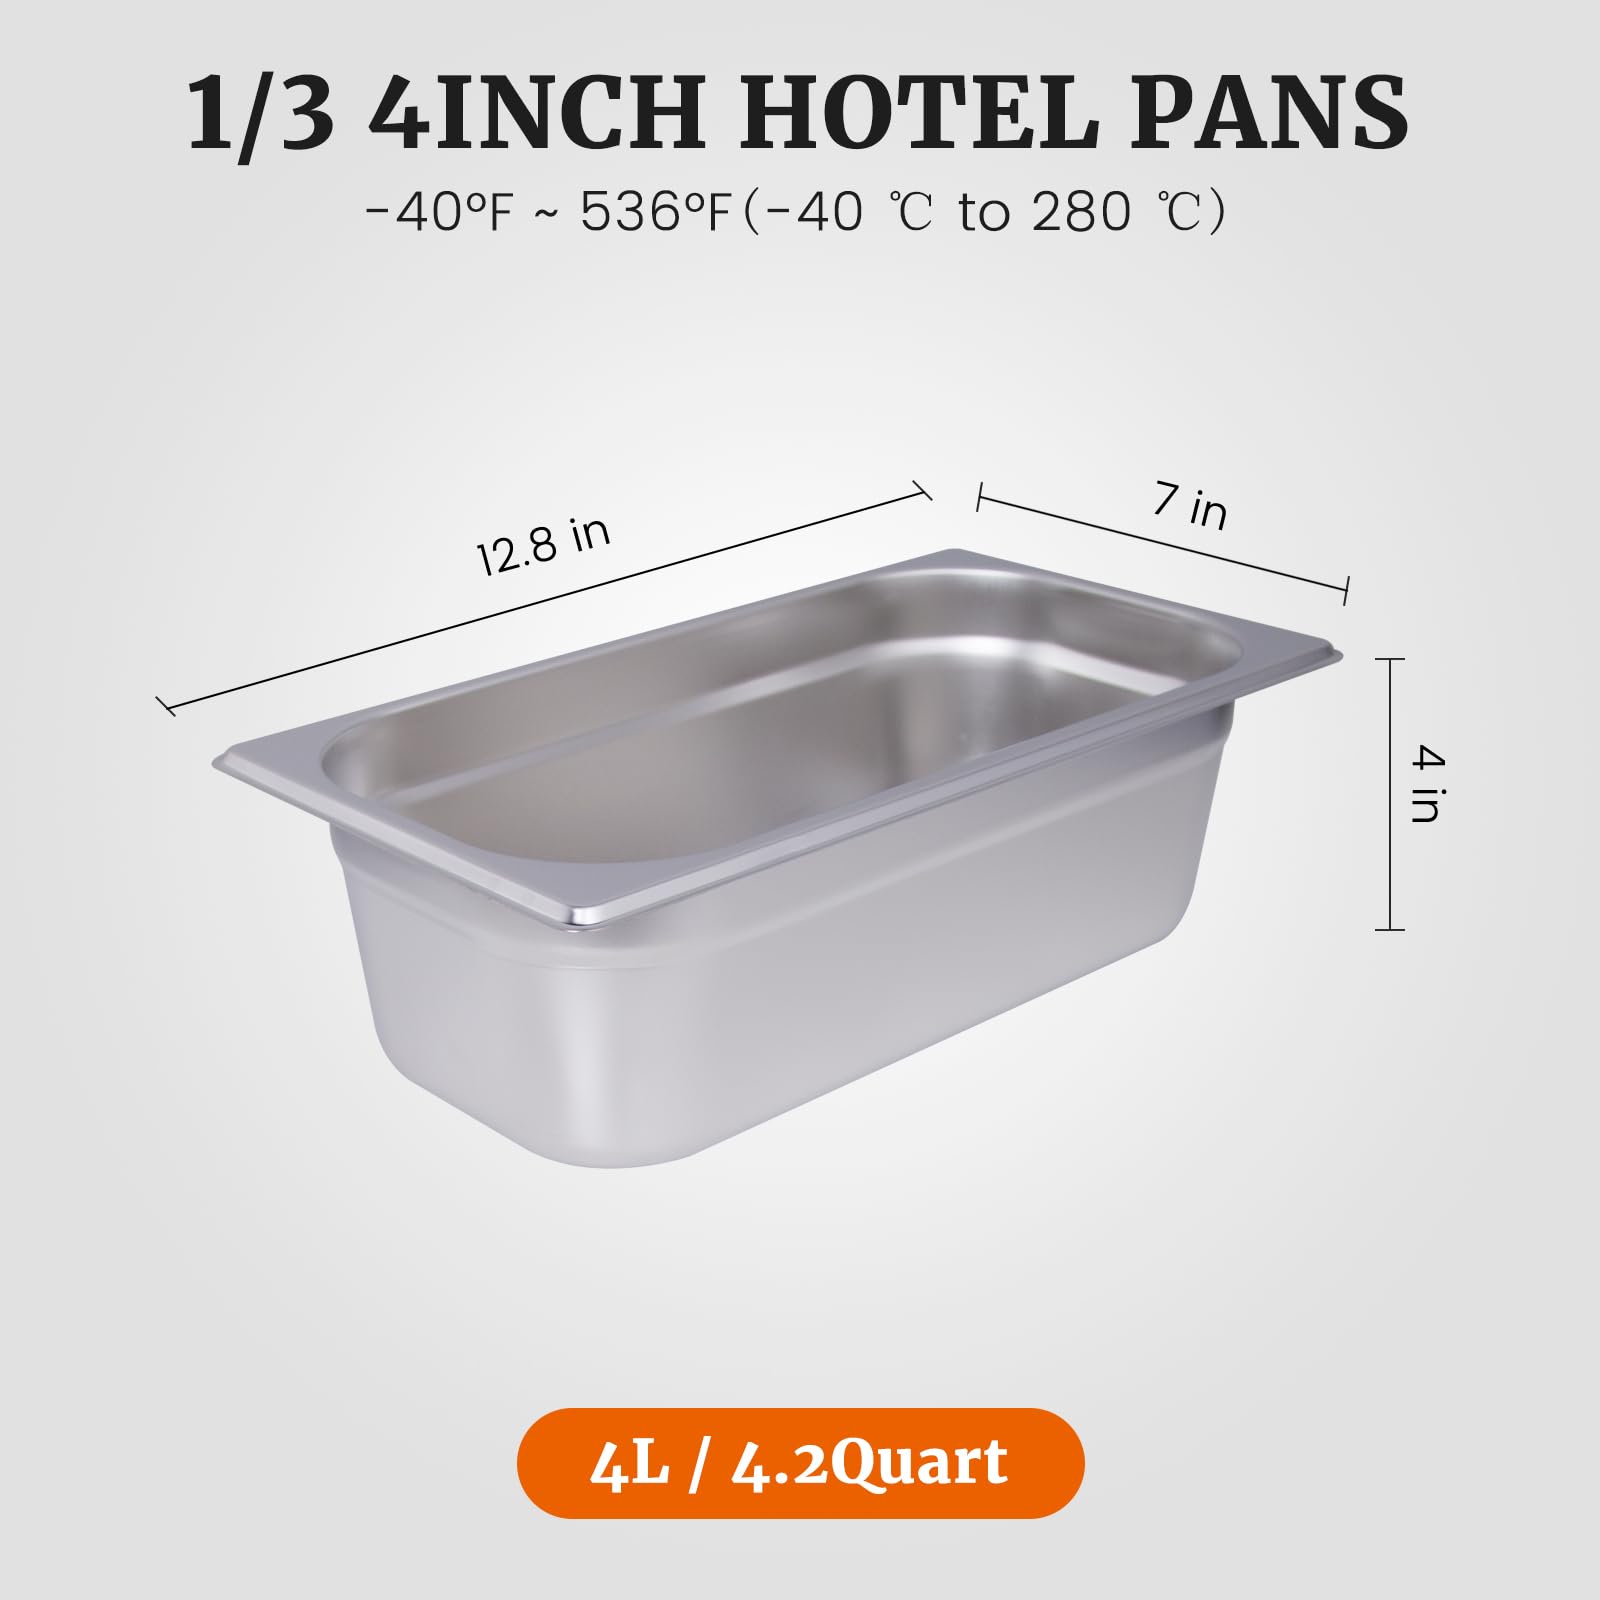 Hakka 6-Pack Hotel Pans Steam Table Pan 1/3 Size Hotel Pan 4" Deep Stainless Steel Pan for Party, Restaurant, Hotel